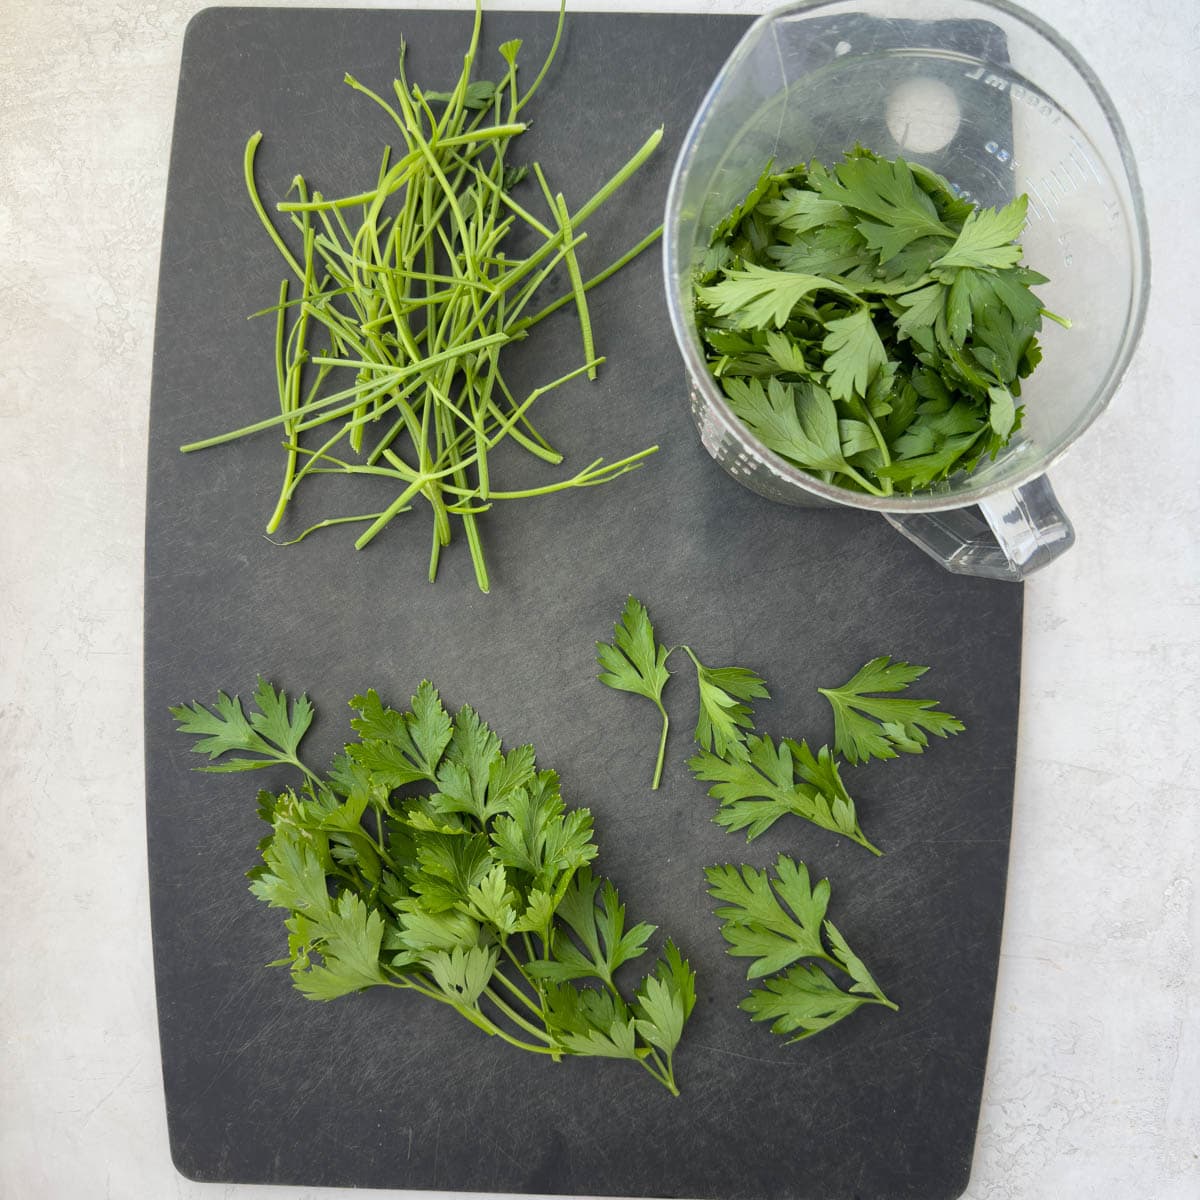 Separating the parsley leaves from the stems on a cutting board.